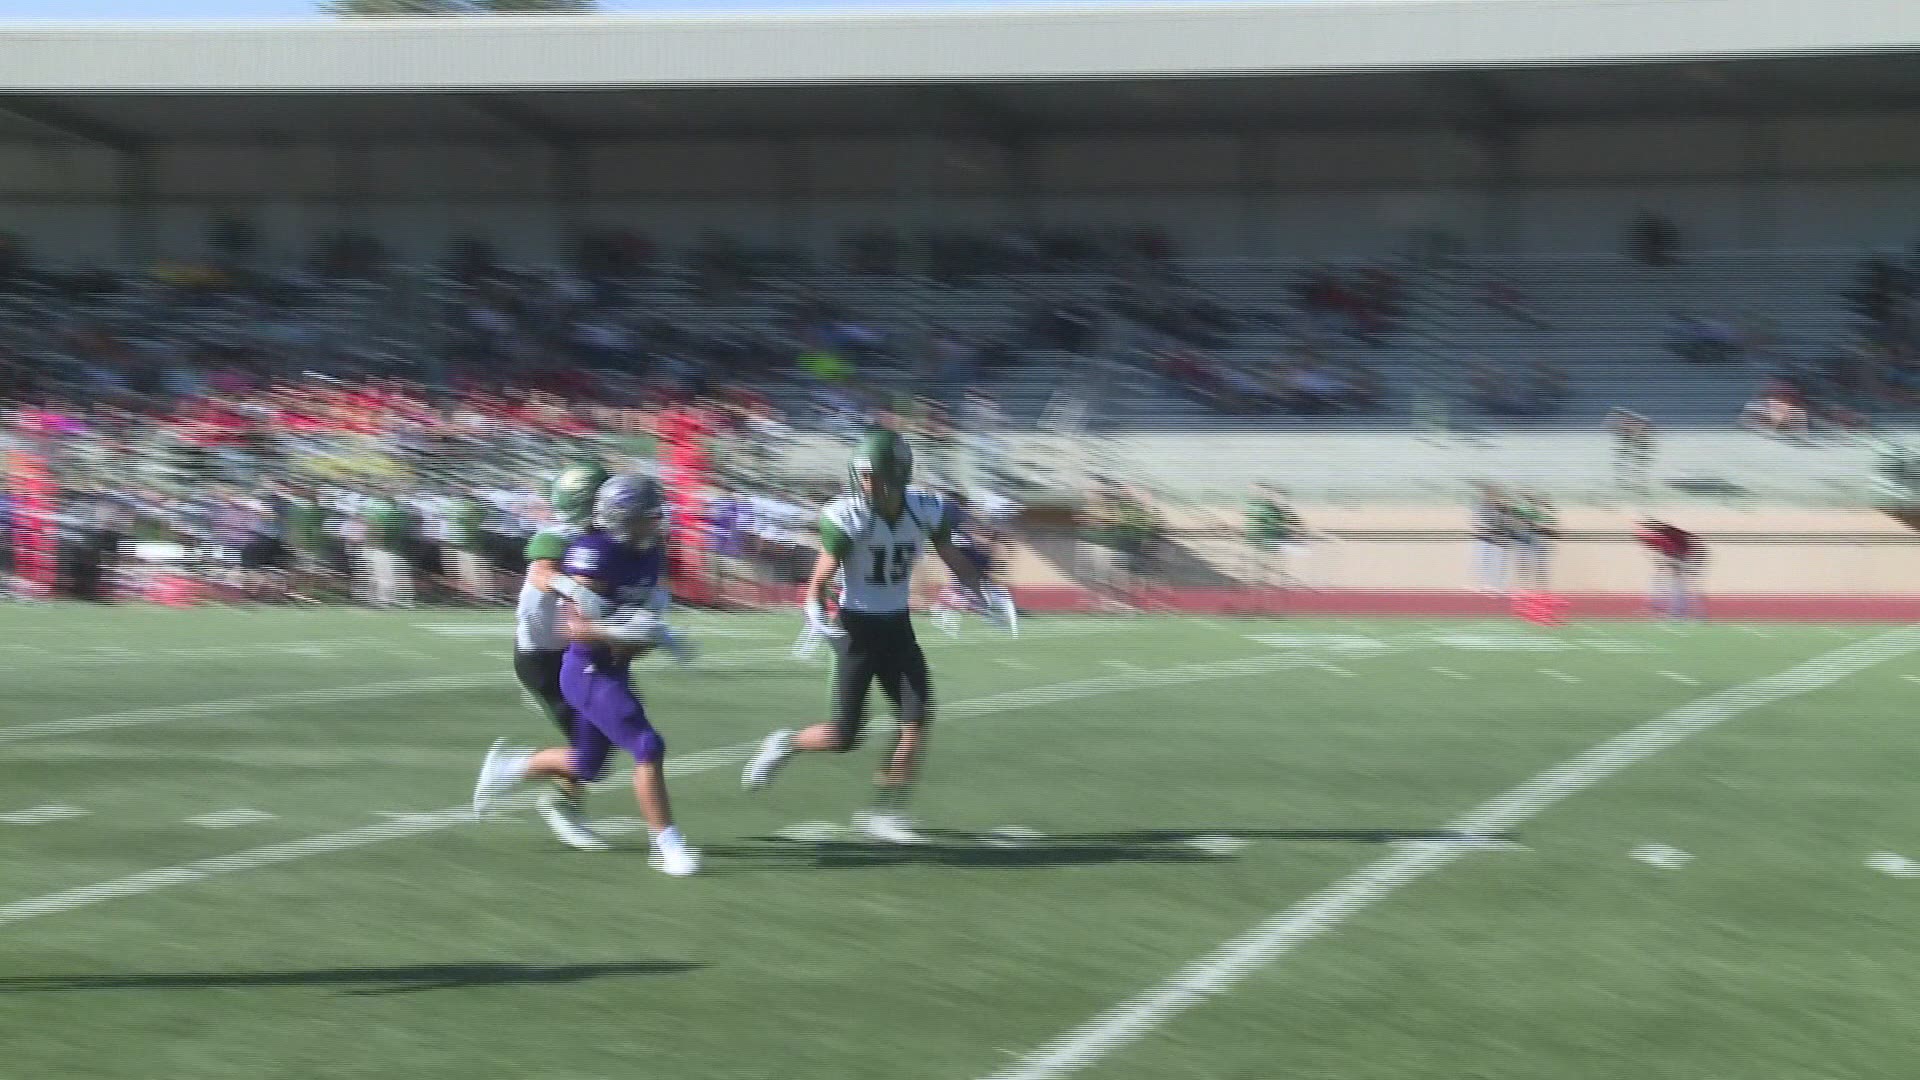 Highlights of the Heritage Timberwolves' 2018 season in Washington. All highlights aired on KGW's Friday Night Flights #KGWPreps